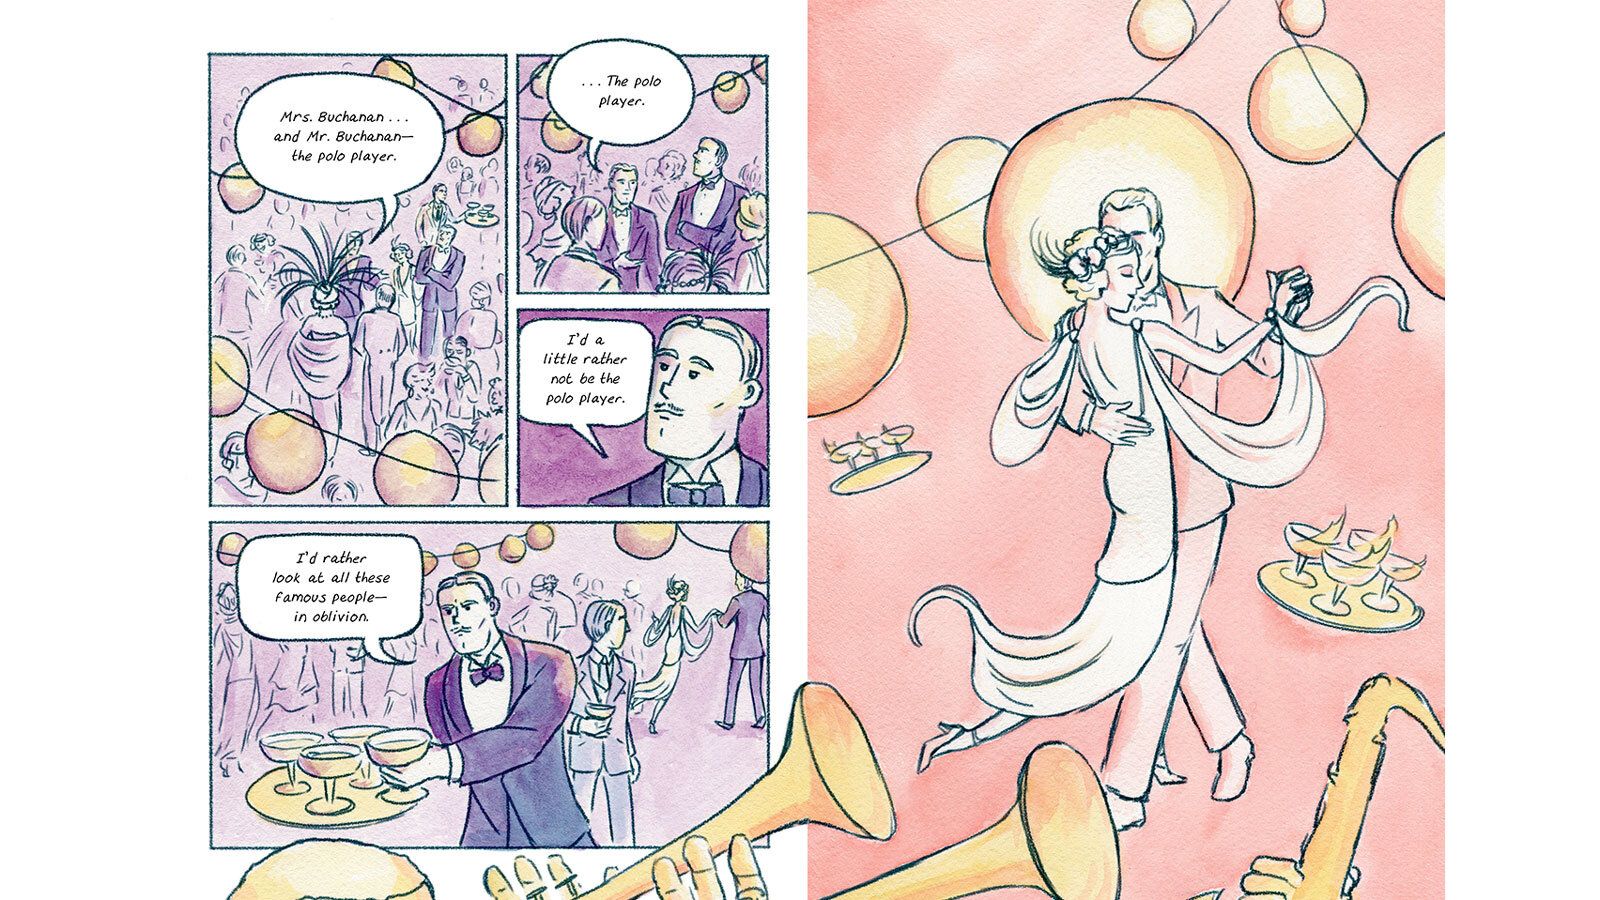 Party scene from The Great Gatsby: A Graphic Novel Adaptation by K. Woodman-Maynard.